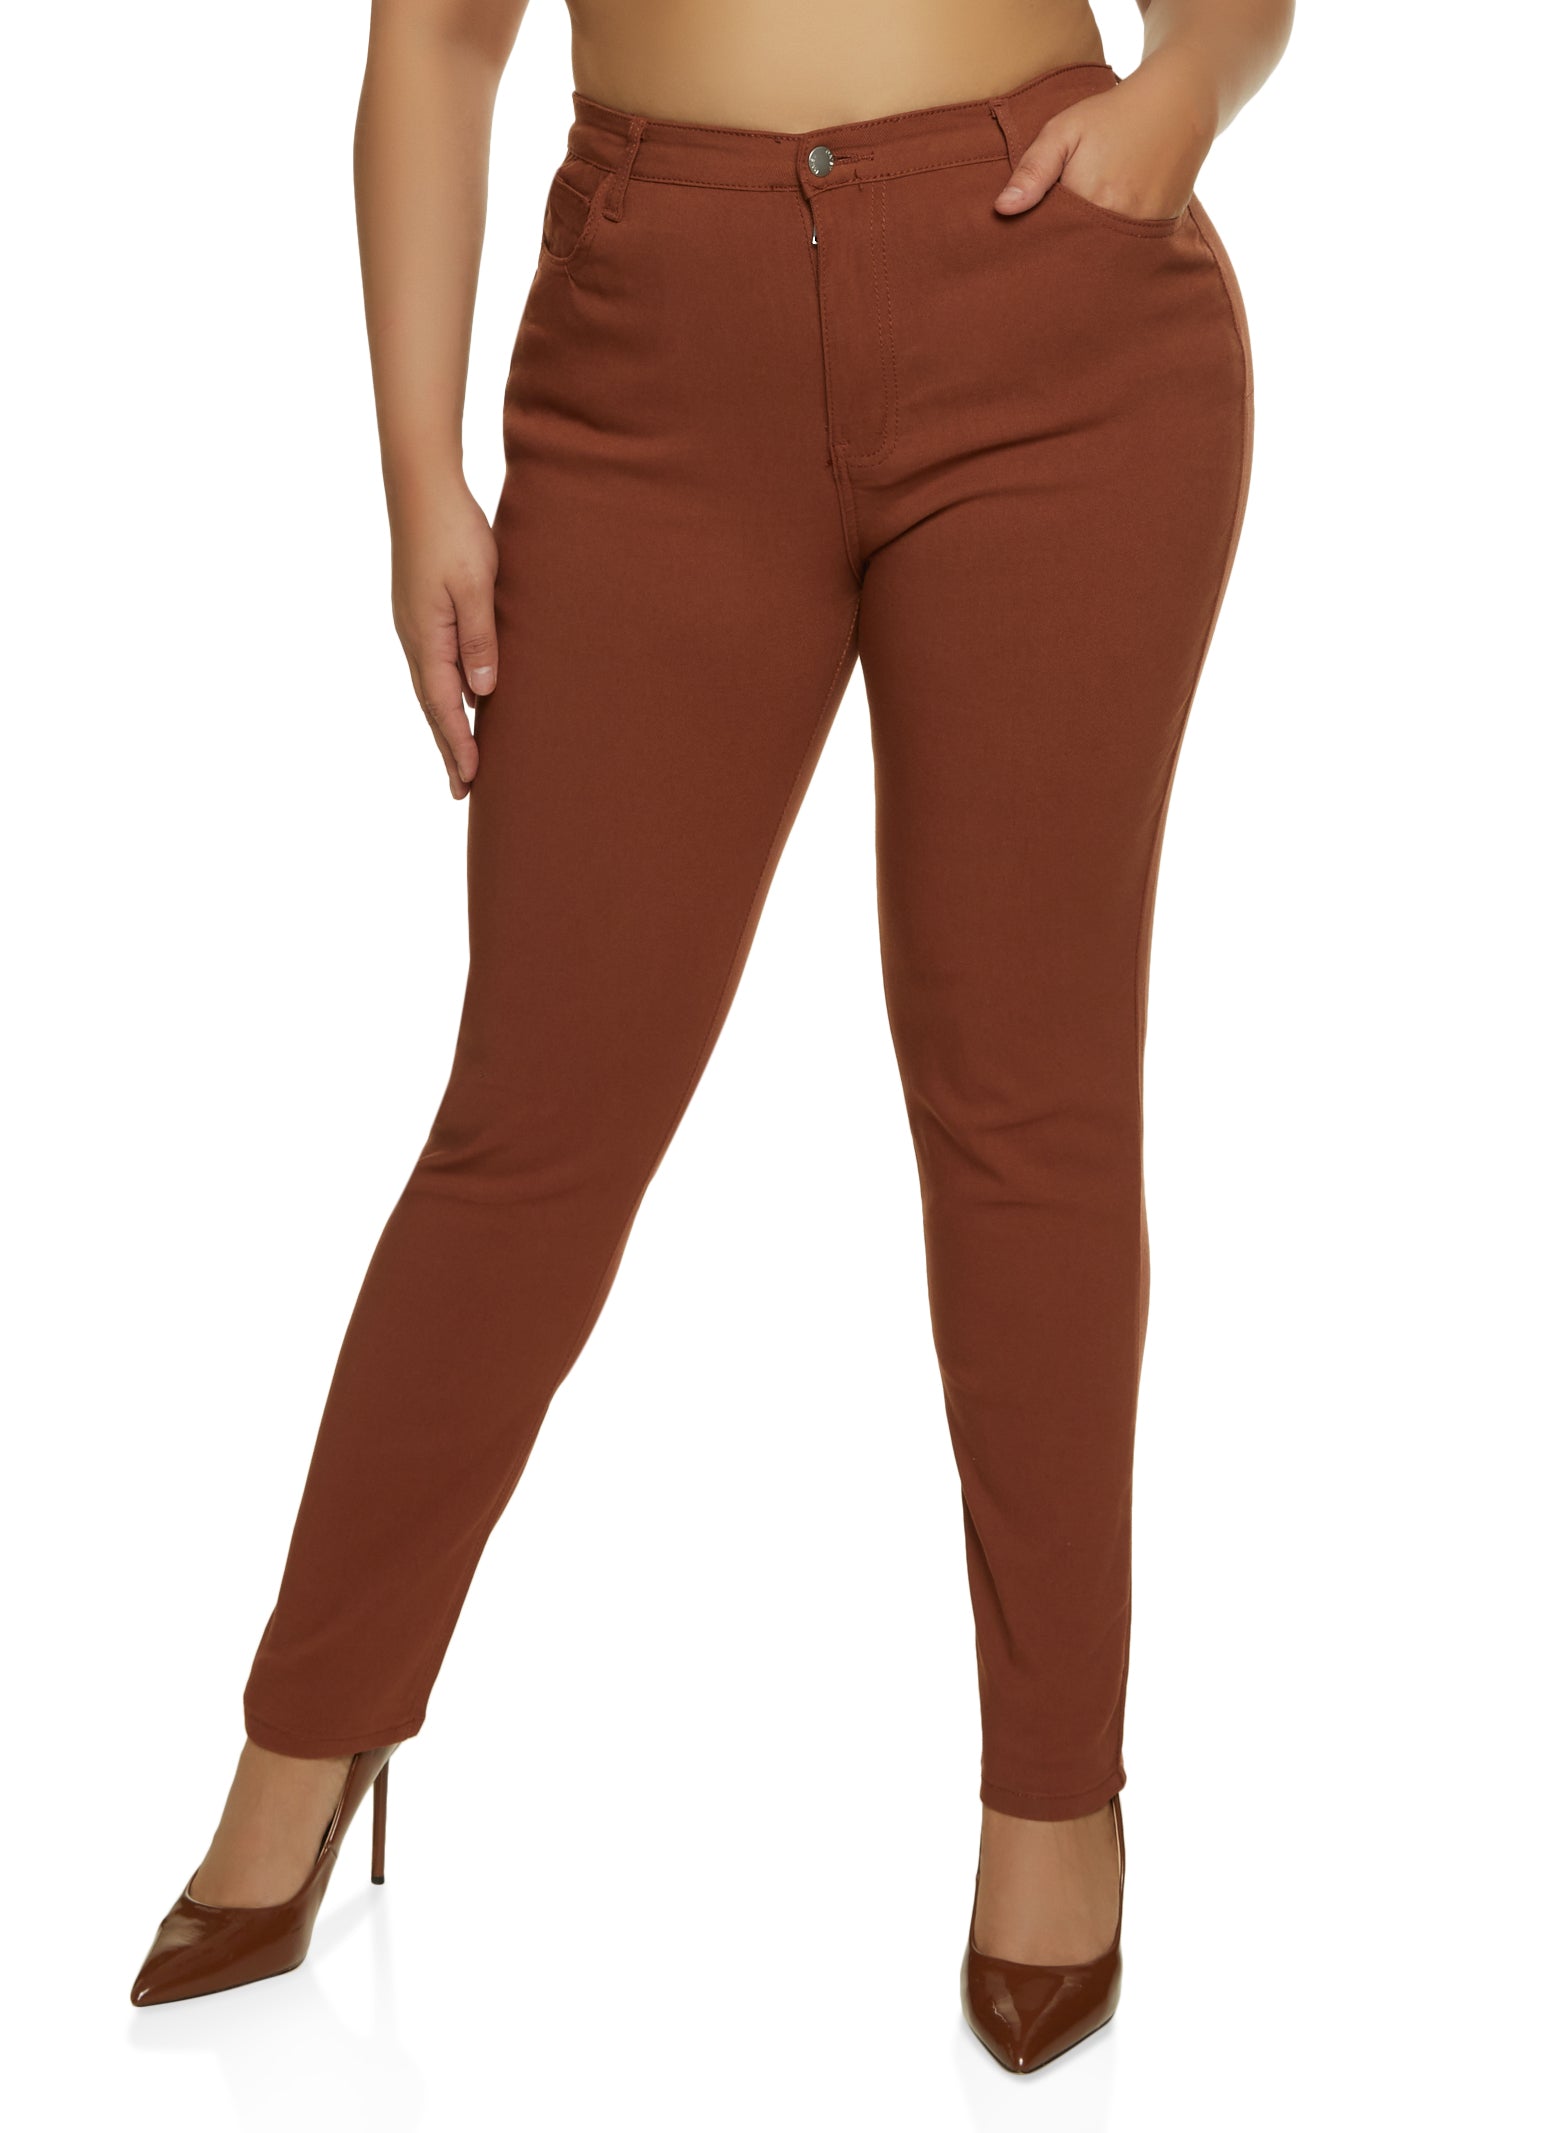 Plus Size Brown Pants, Everyday Low Prices